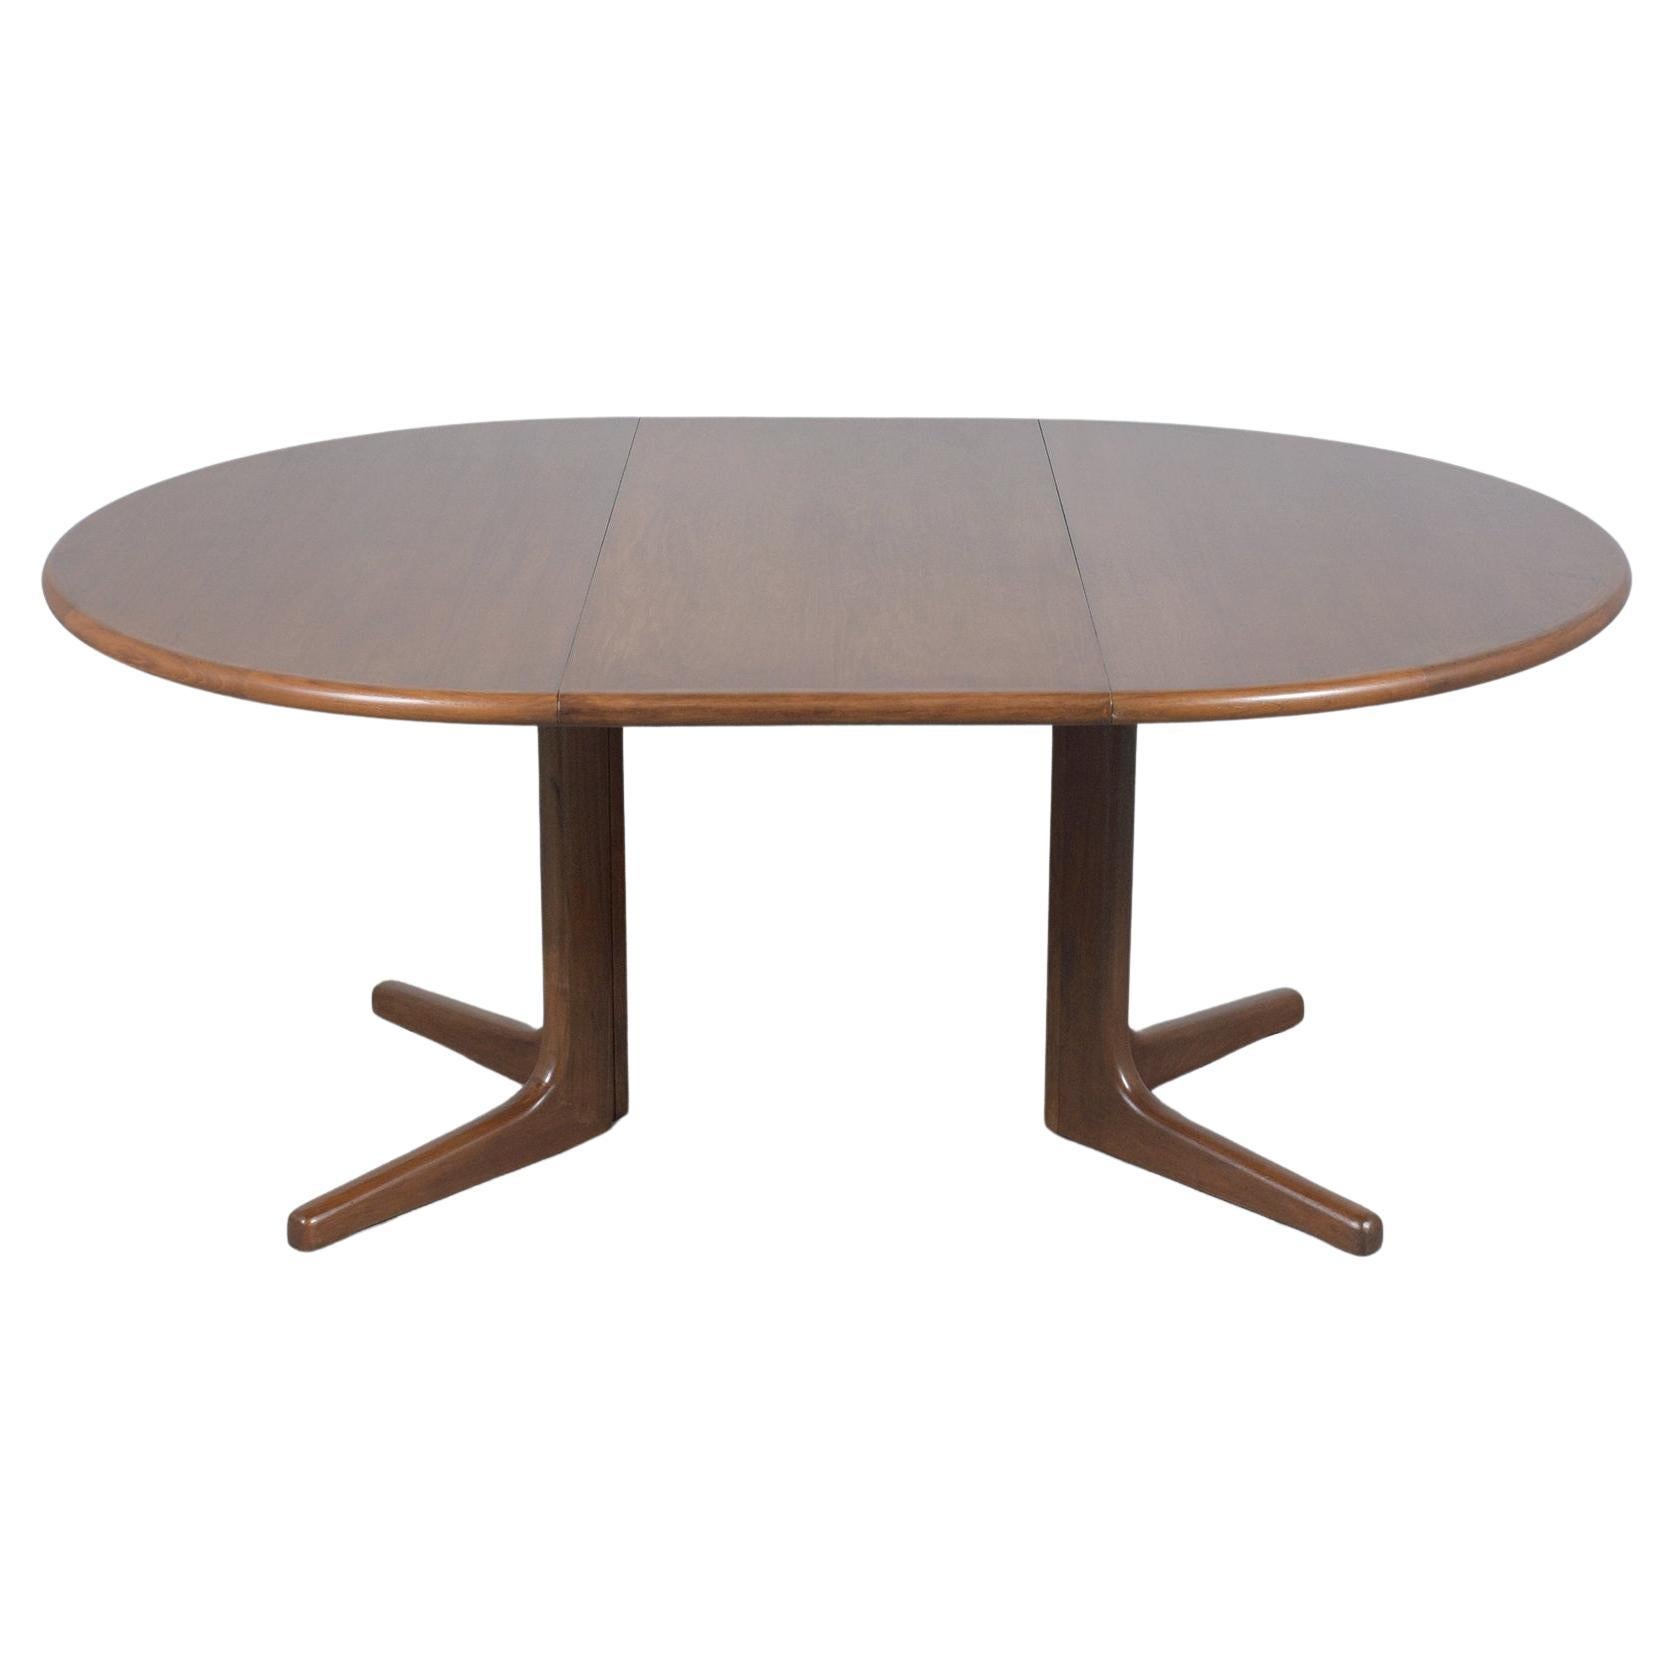 Discover the allure of Danish design with our exceptional vintage extendable dining table, embodying mid-century modern elegance. This table has been expertly crafted from teak wood and meticulously restored by our skilled in-house craftsmen to